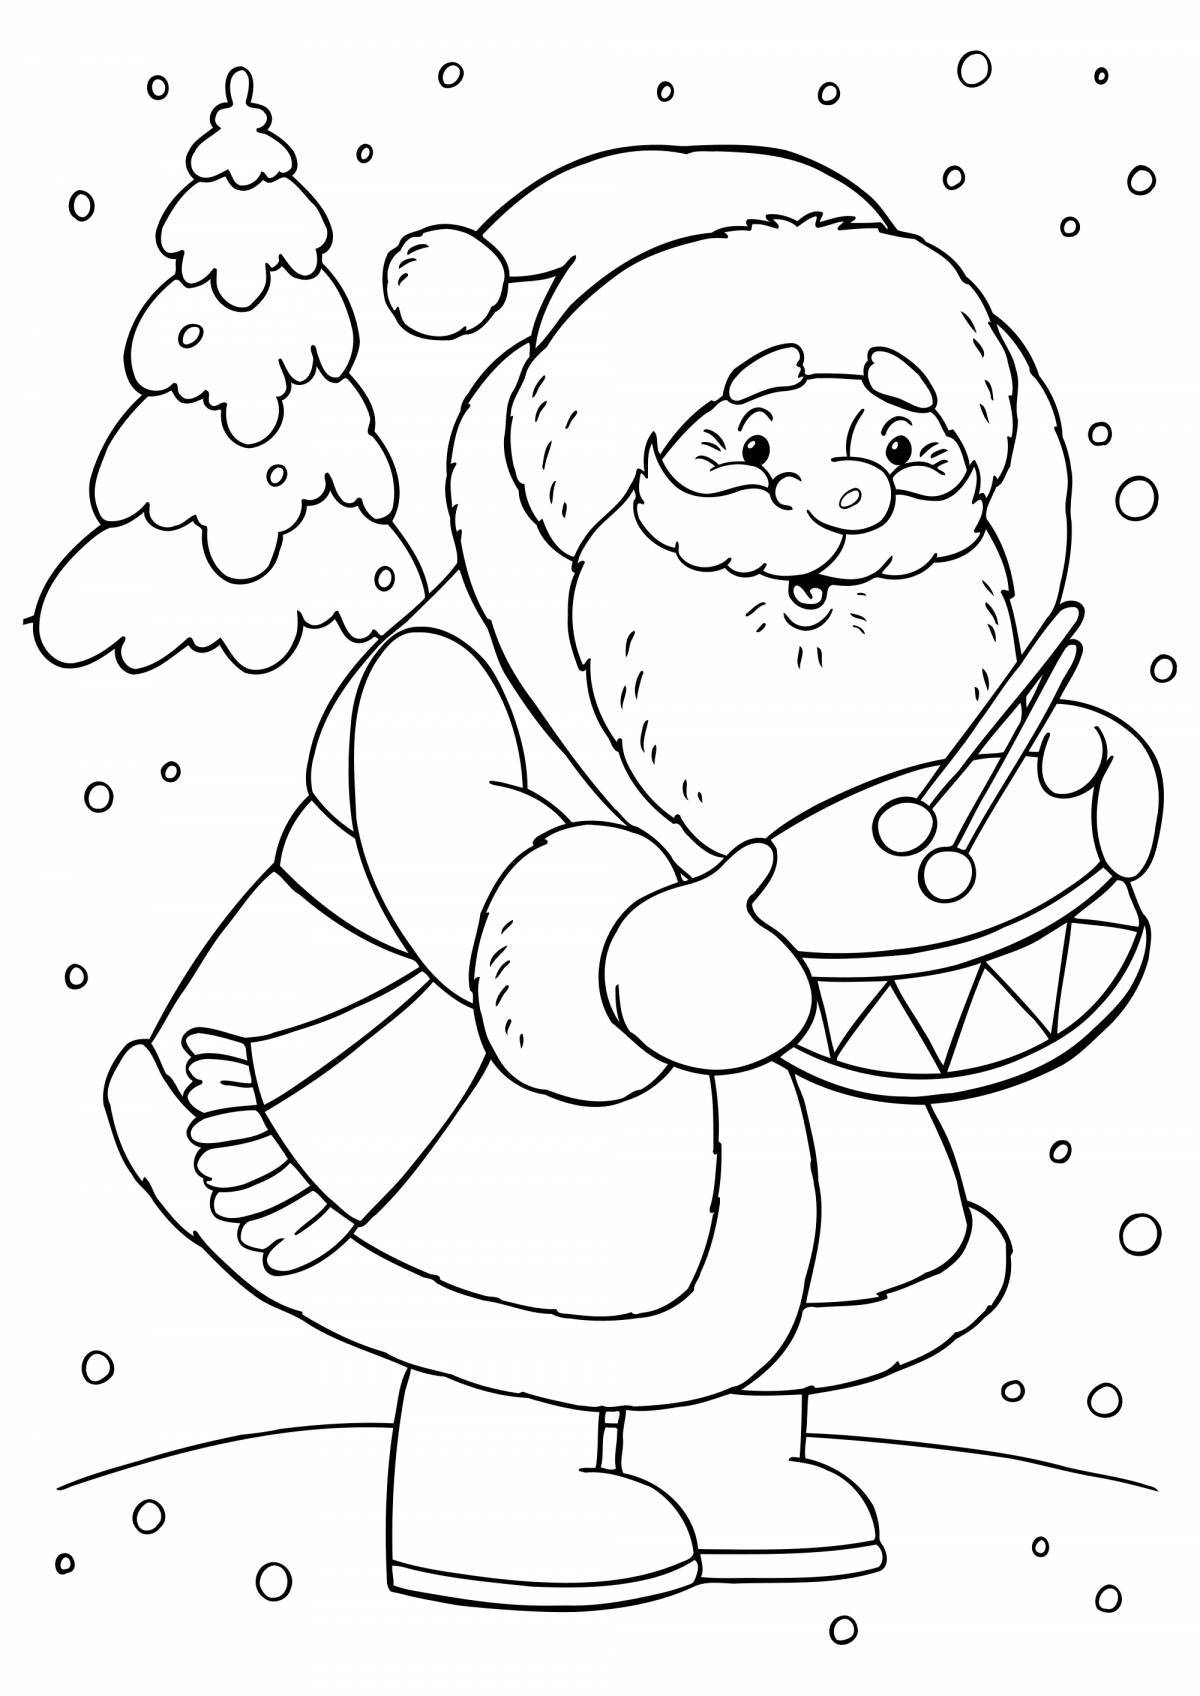 Exotic children's Christmas coloring book